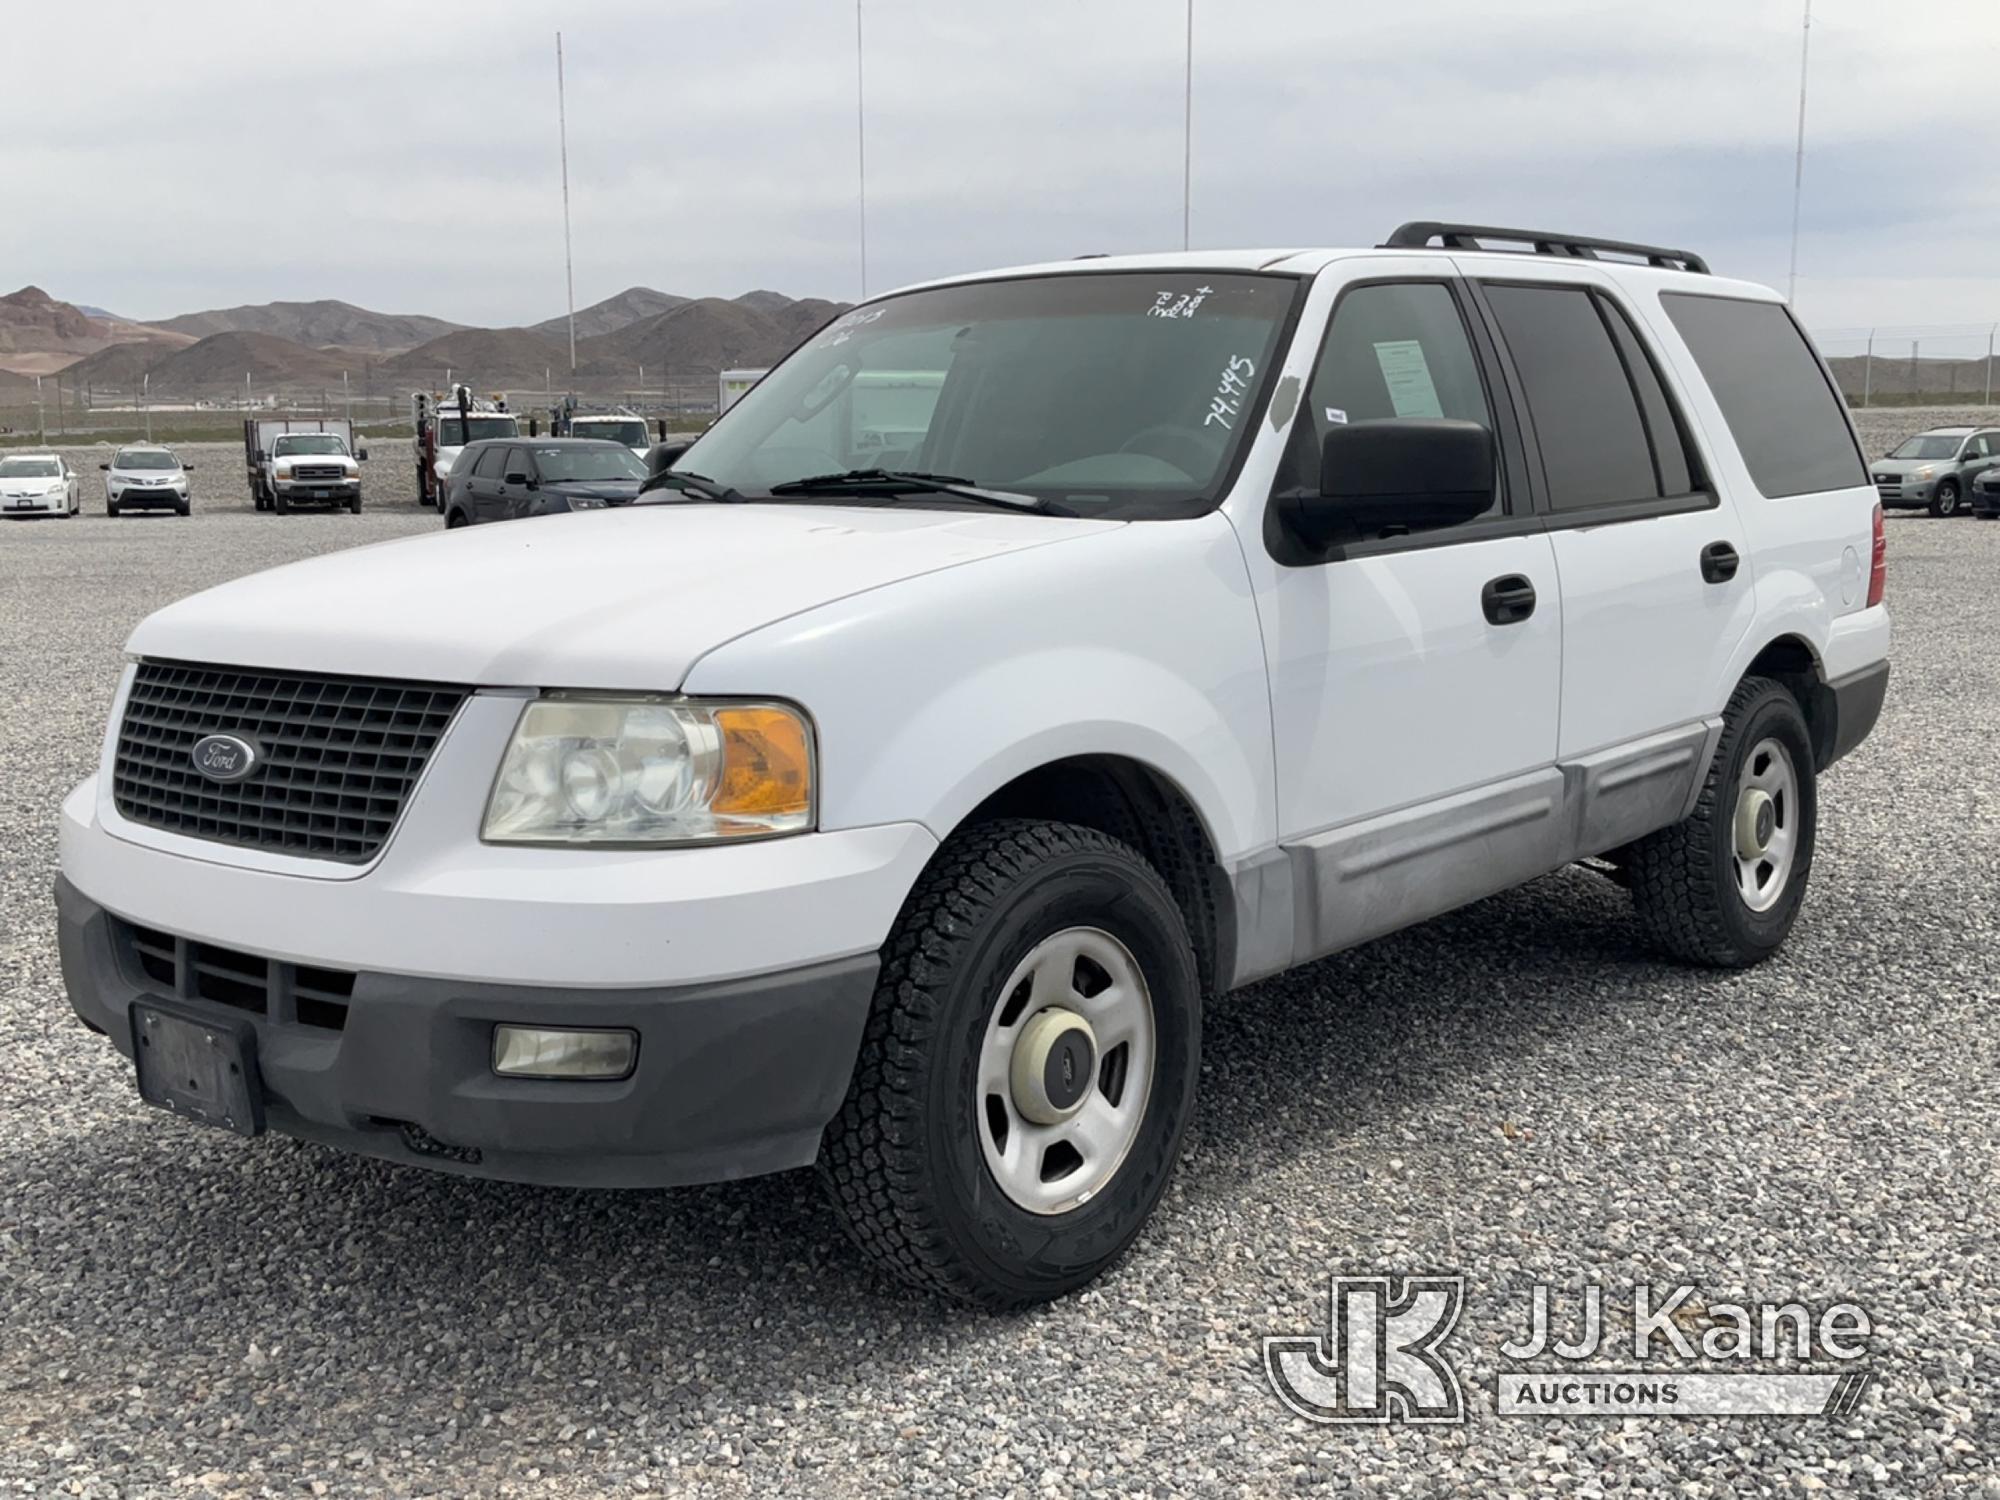 (Las Vegas, NV) 2006 Ford Expedition 3rd Row Seat Runs & Moves